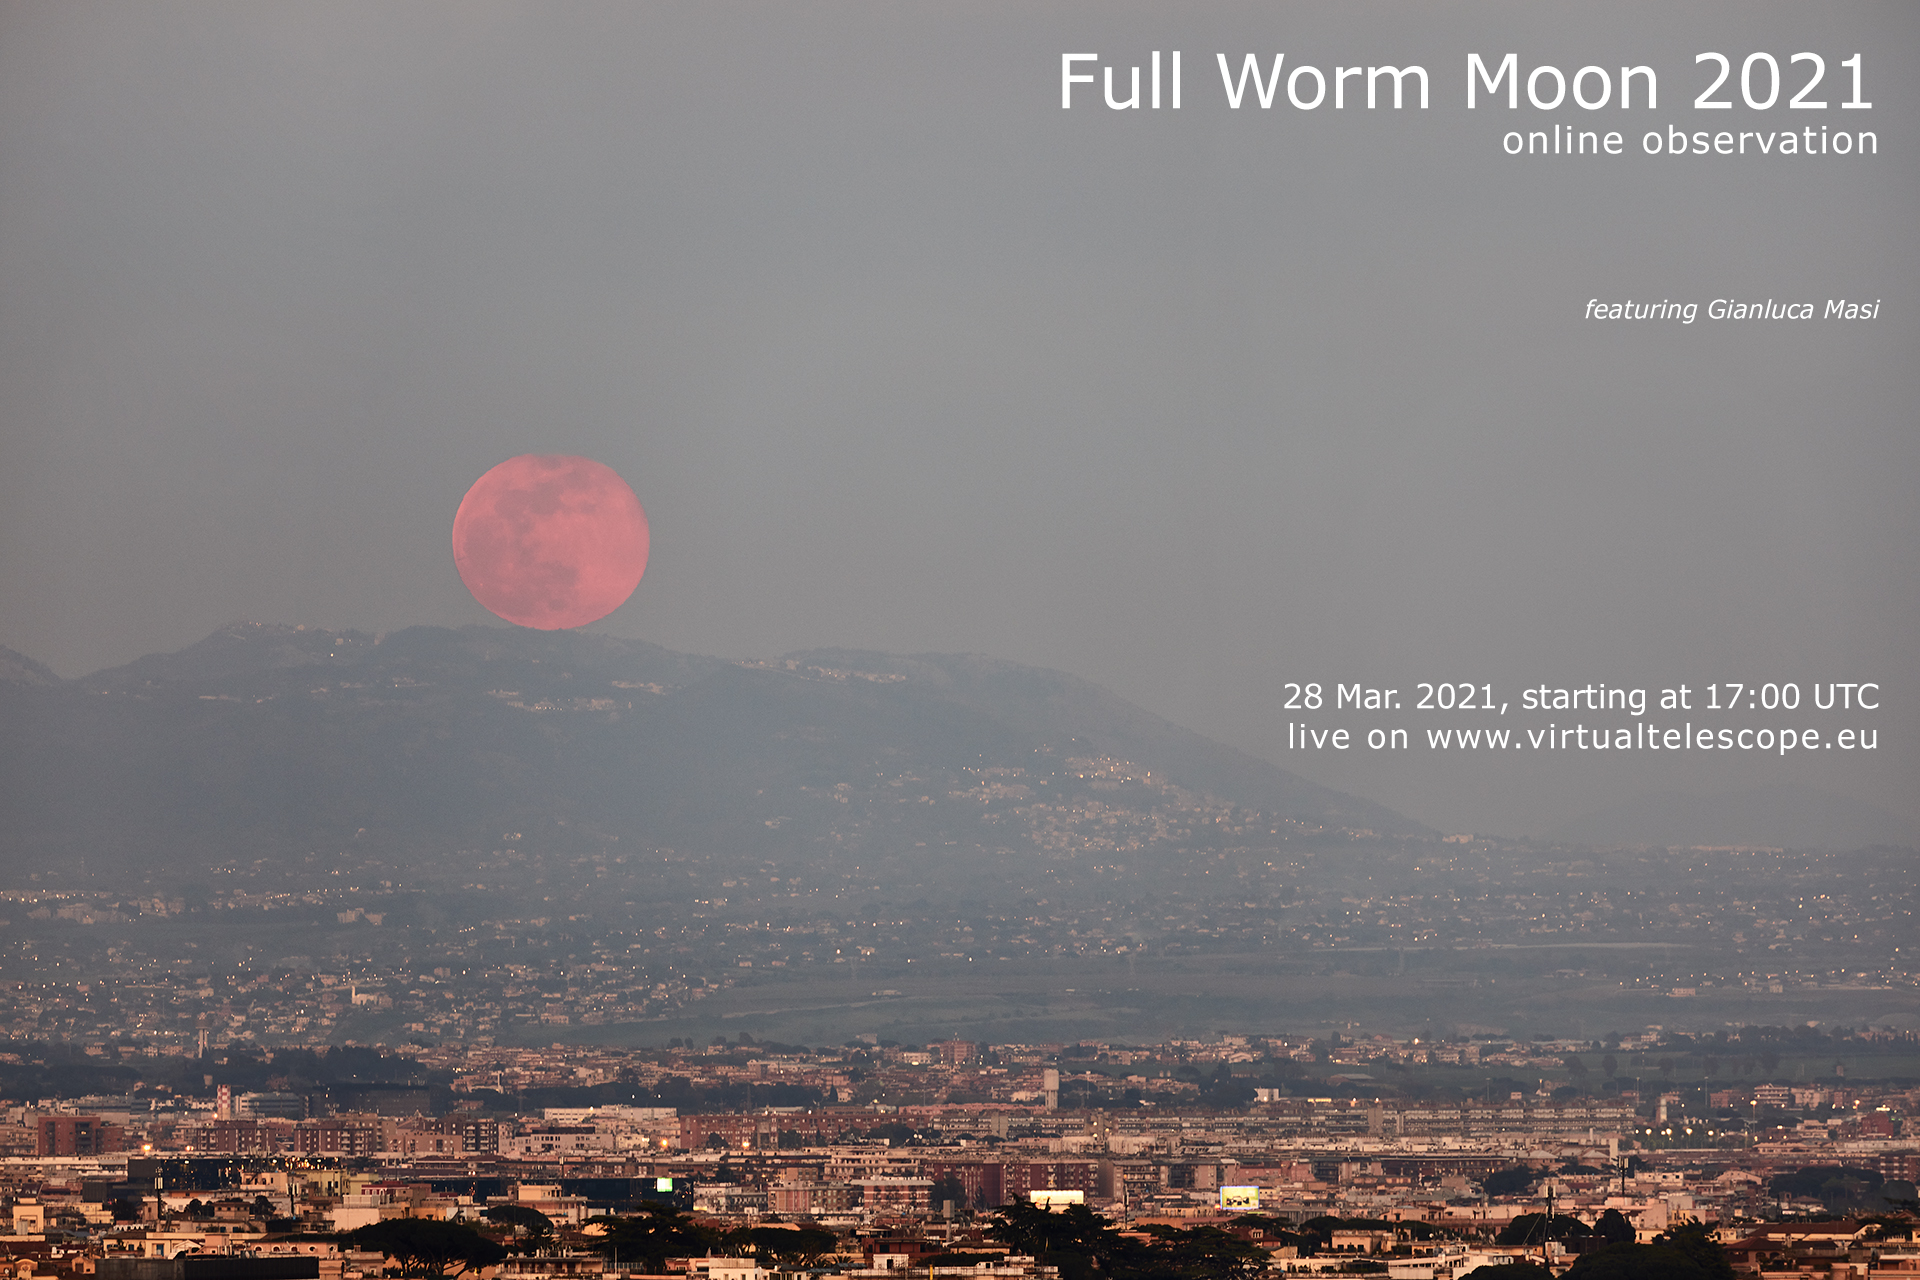 Full Worm Moon 2021: poster of the event.